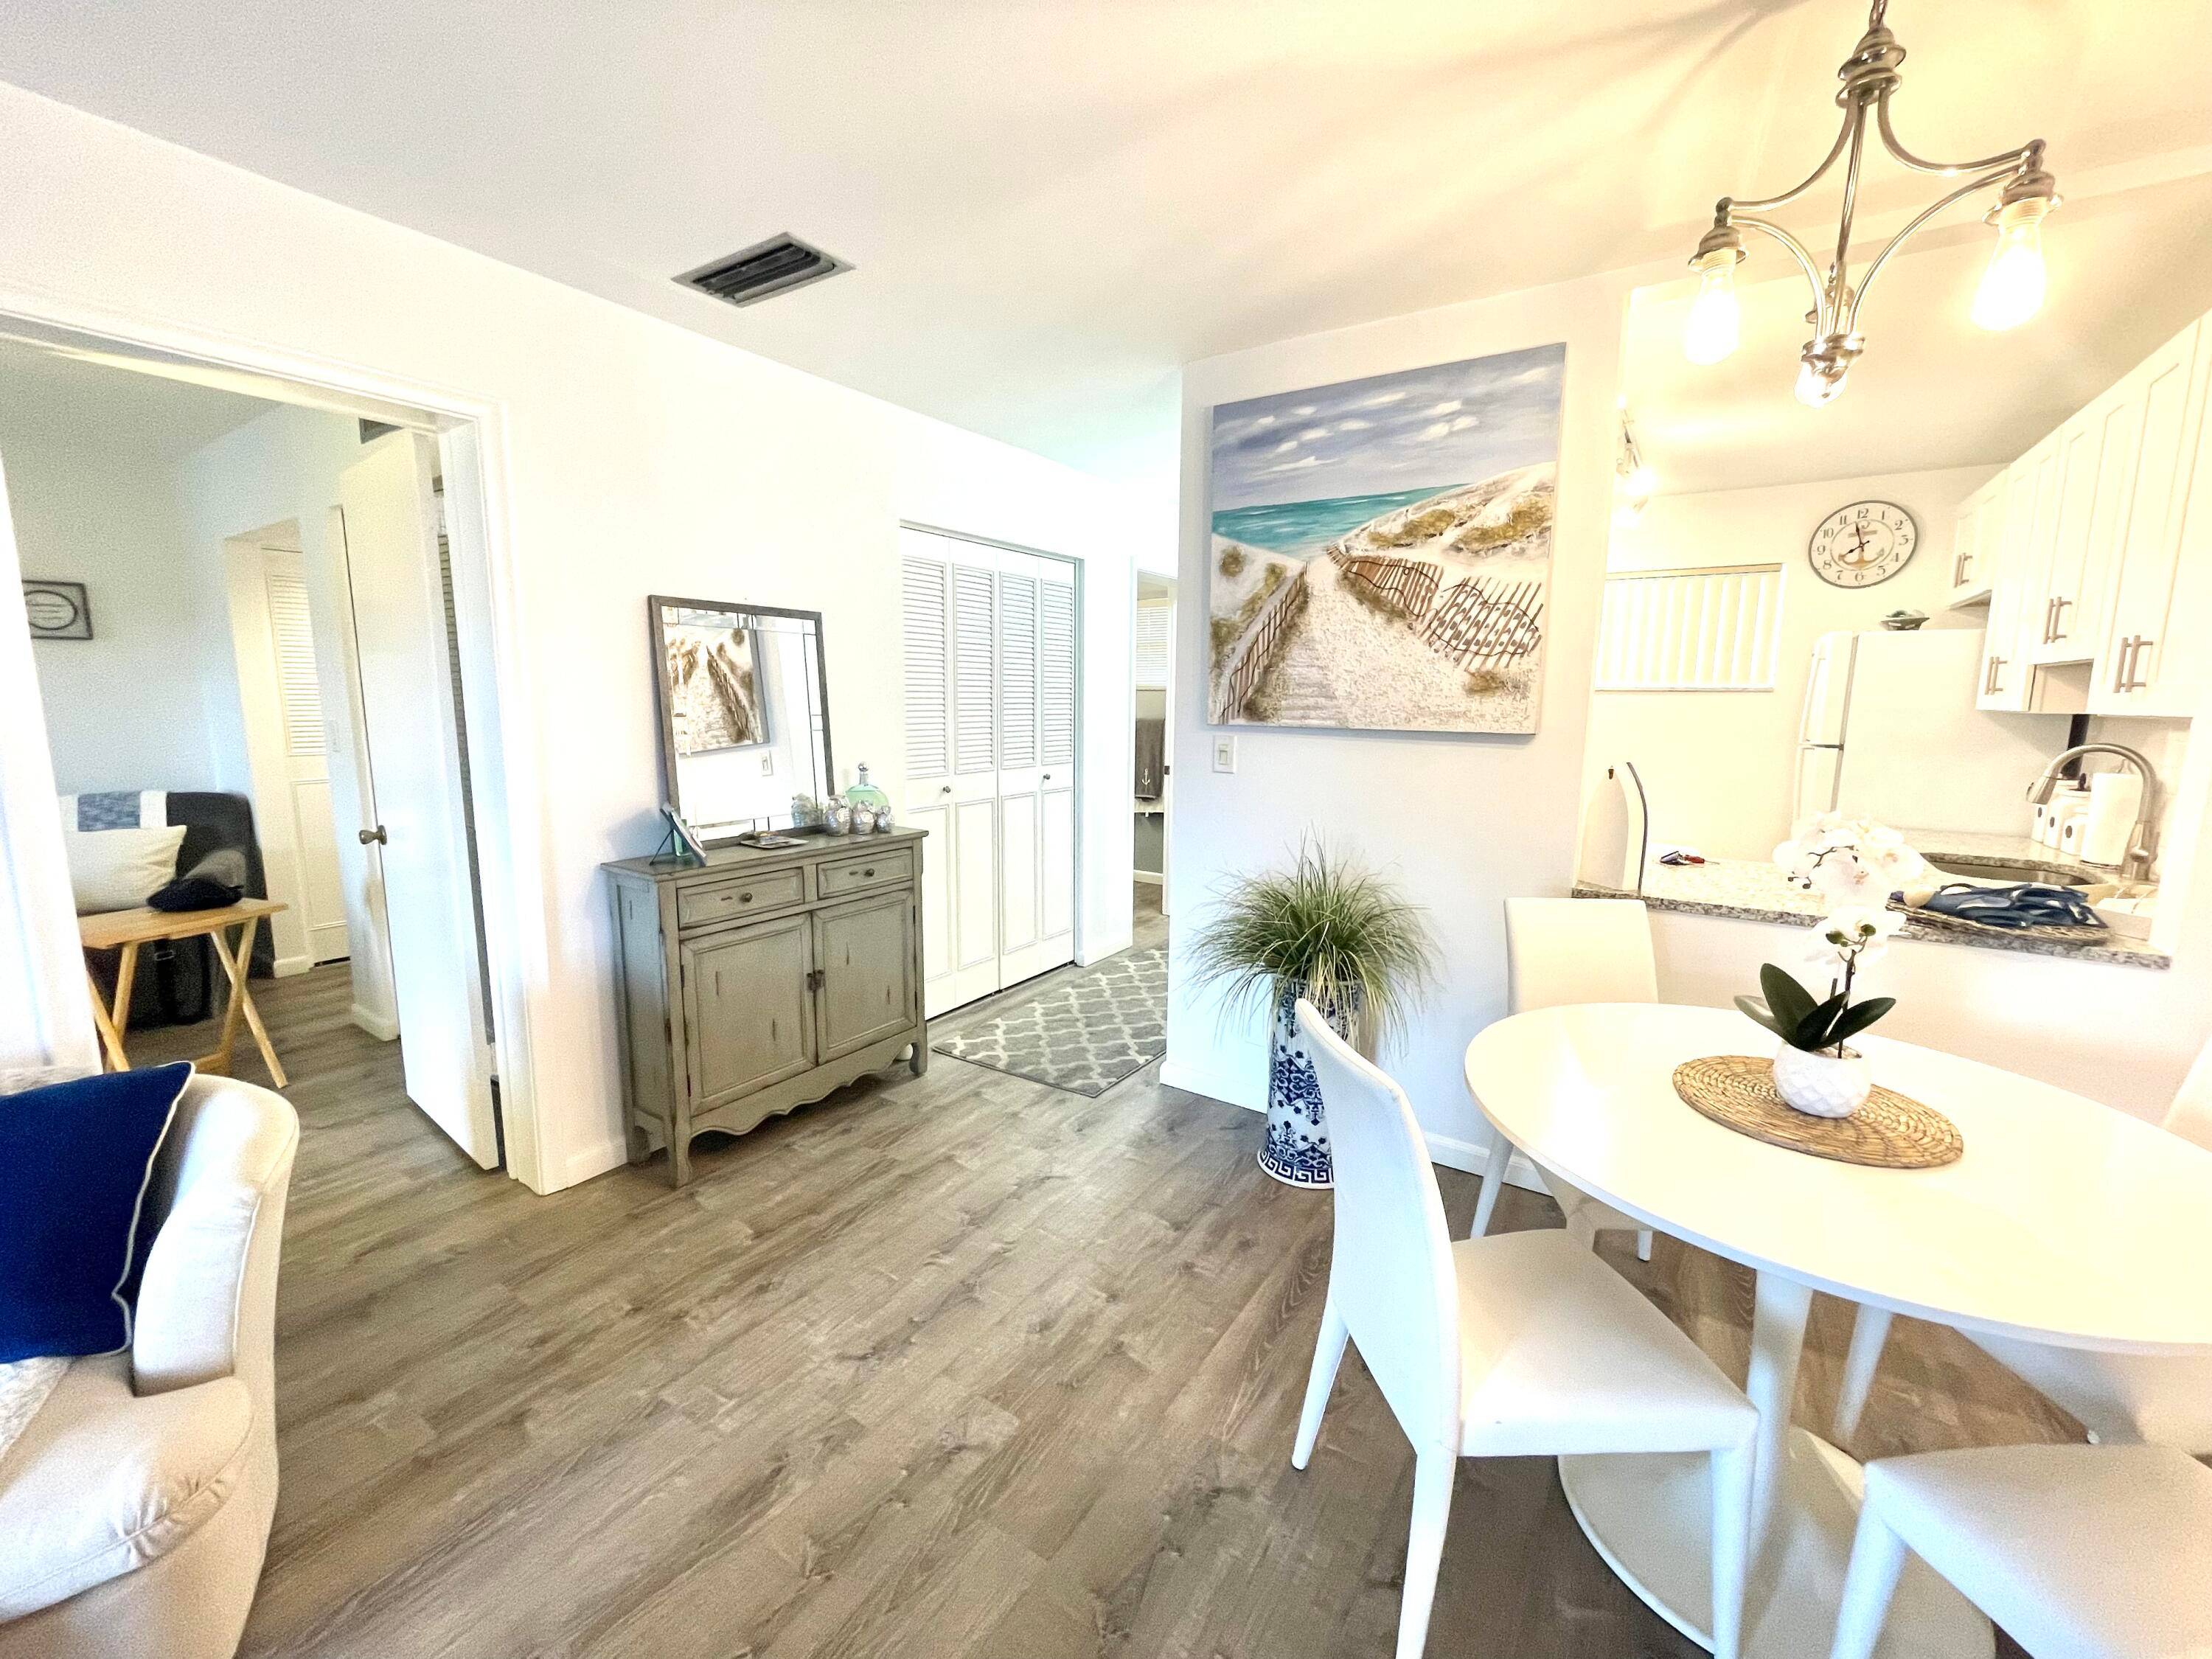 MOTIVATED SELLER ! This completely remodeled 1 bedroom 1.